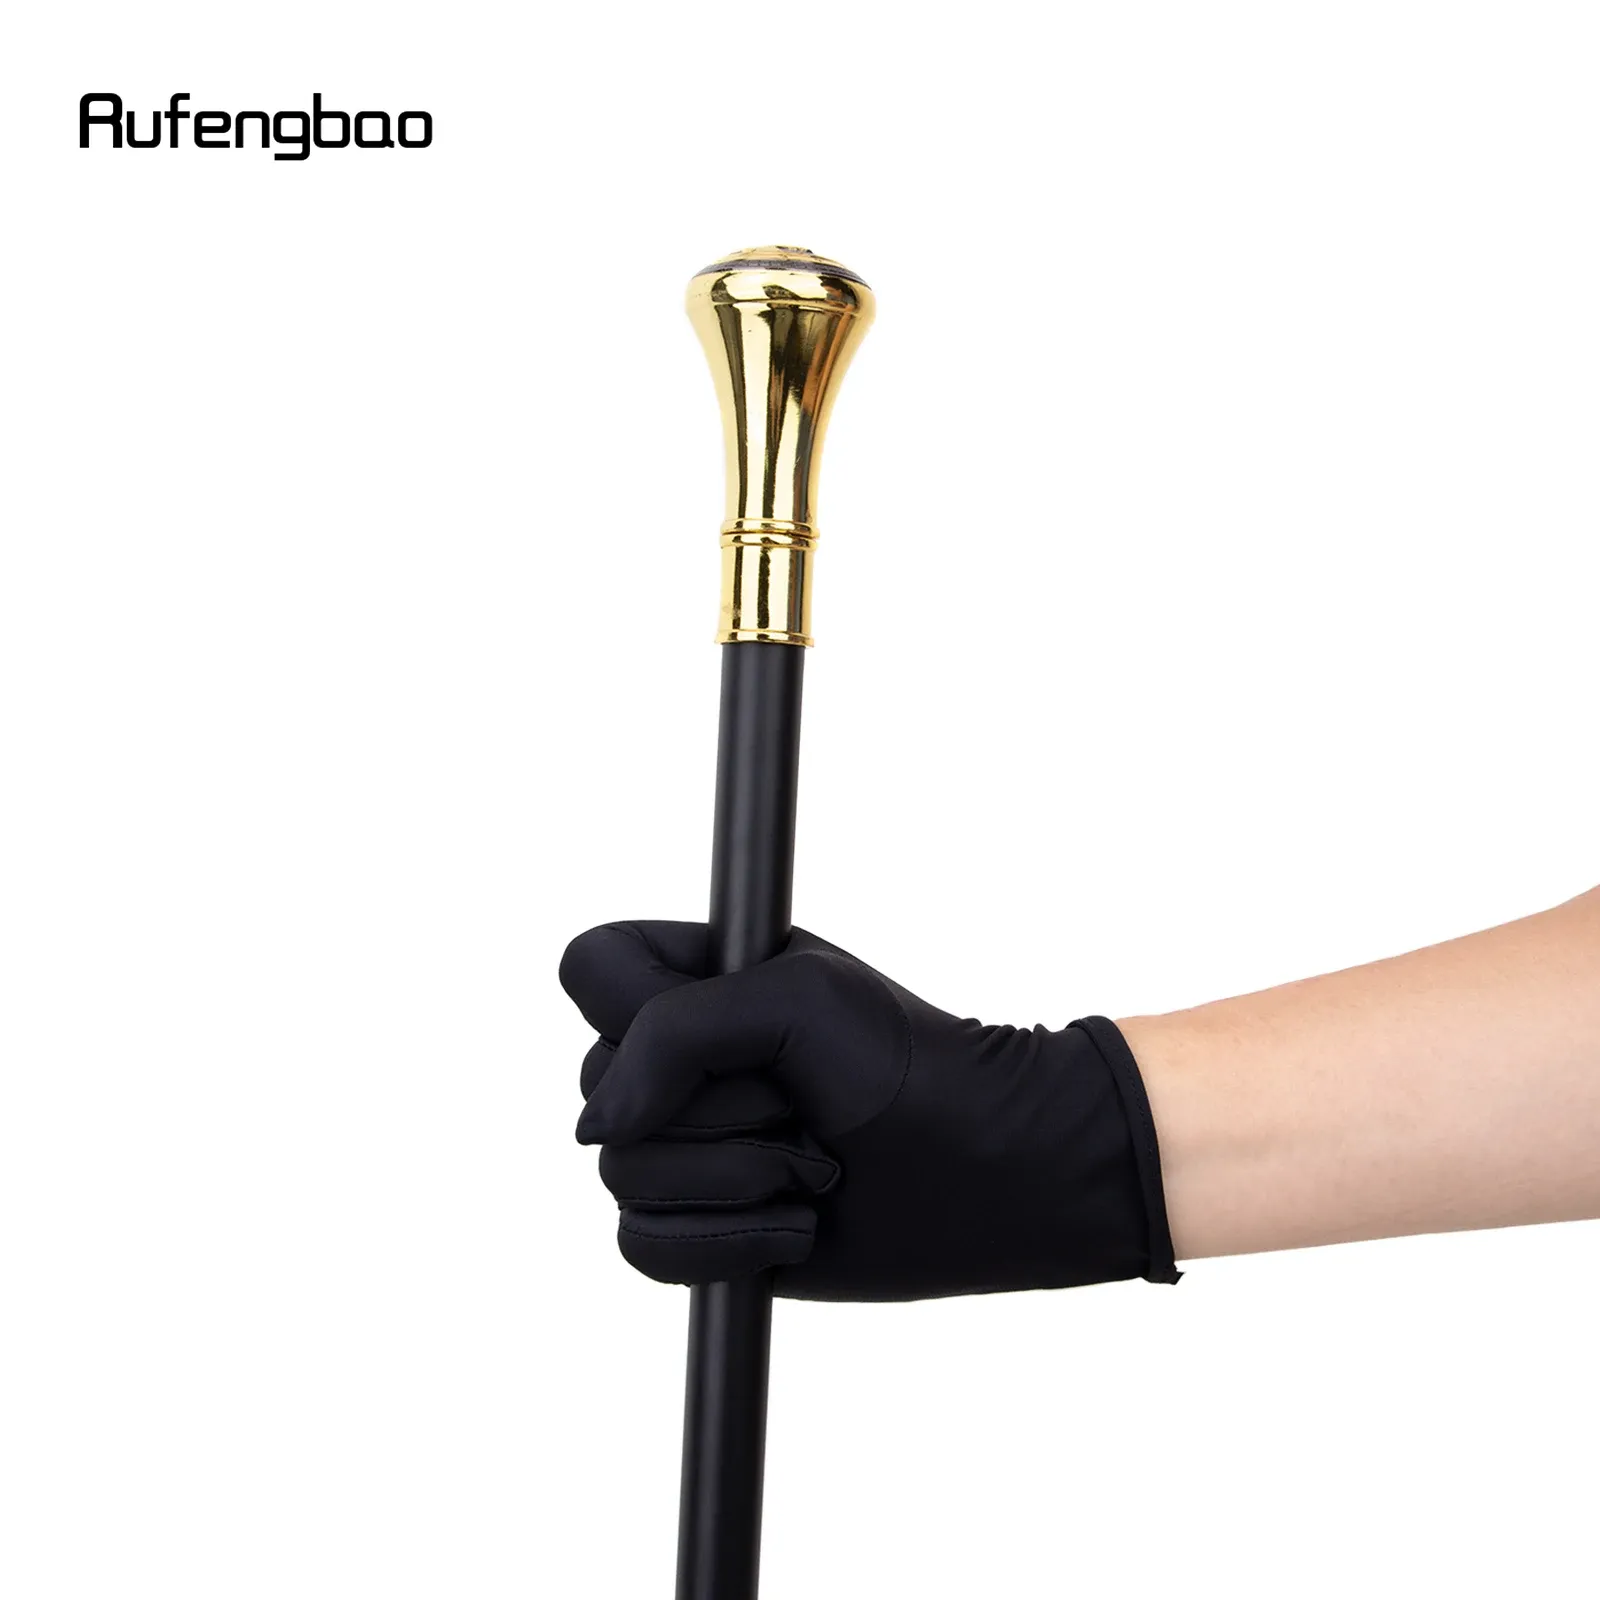 Golden Unity Walking Stick: Relaxed Unity Cross Hand Cane For Gentlemen  93cm Long, Fashionable Design, Faith & Style From Rufengbao, $12.07